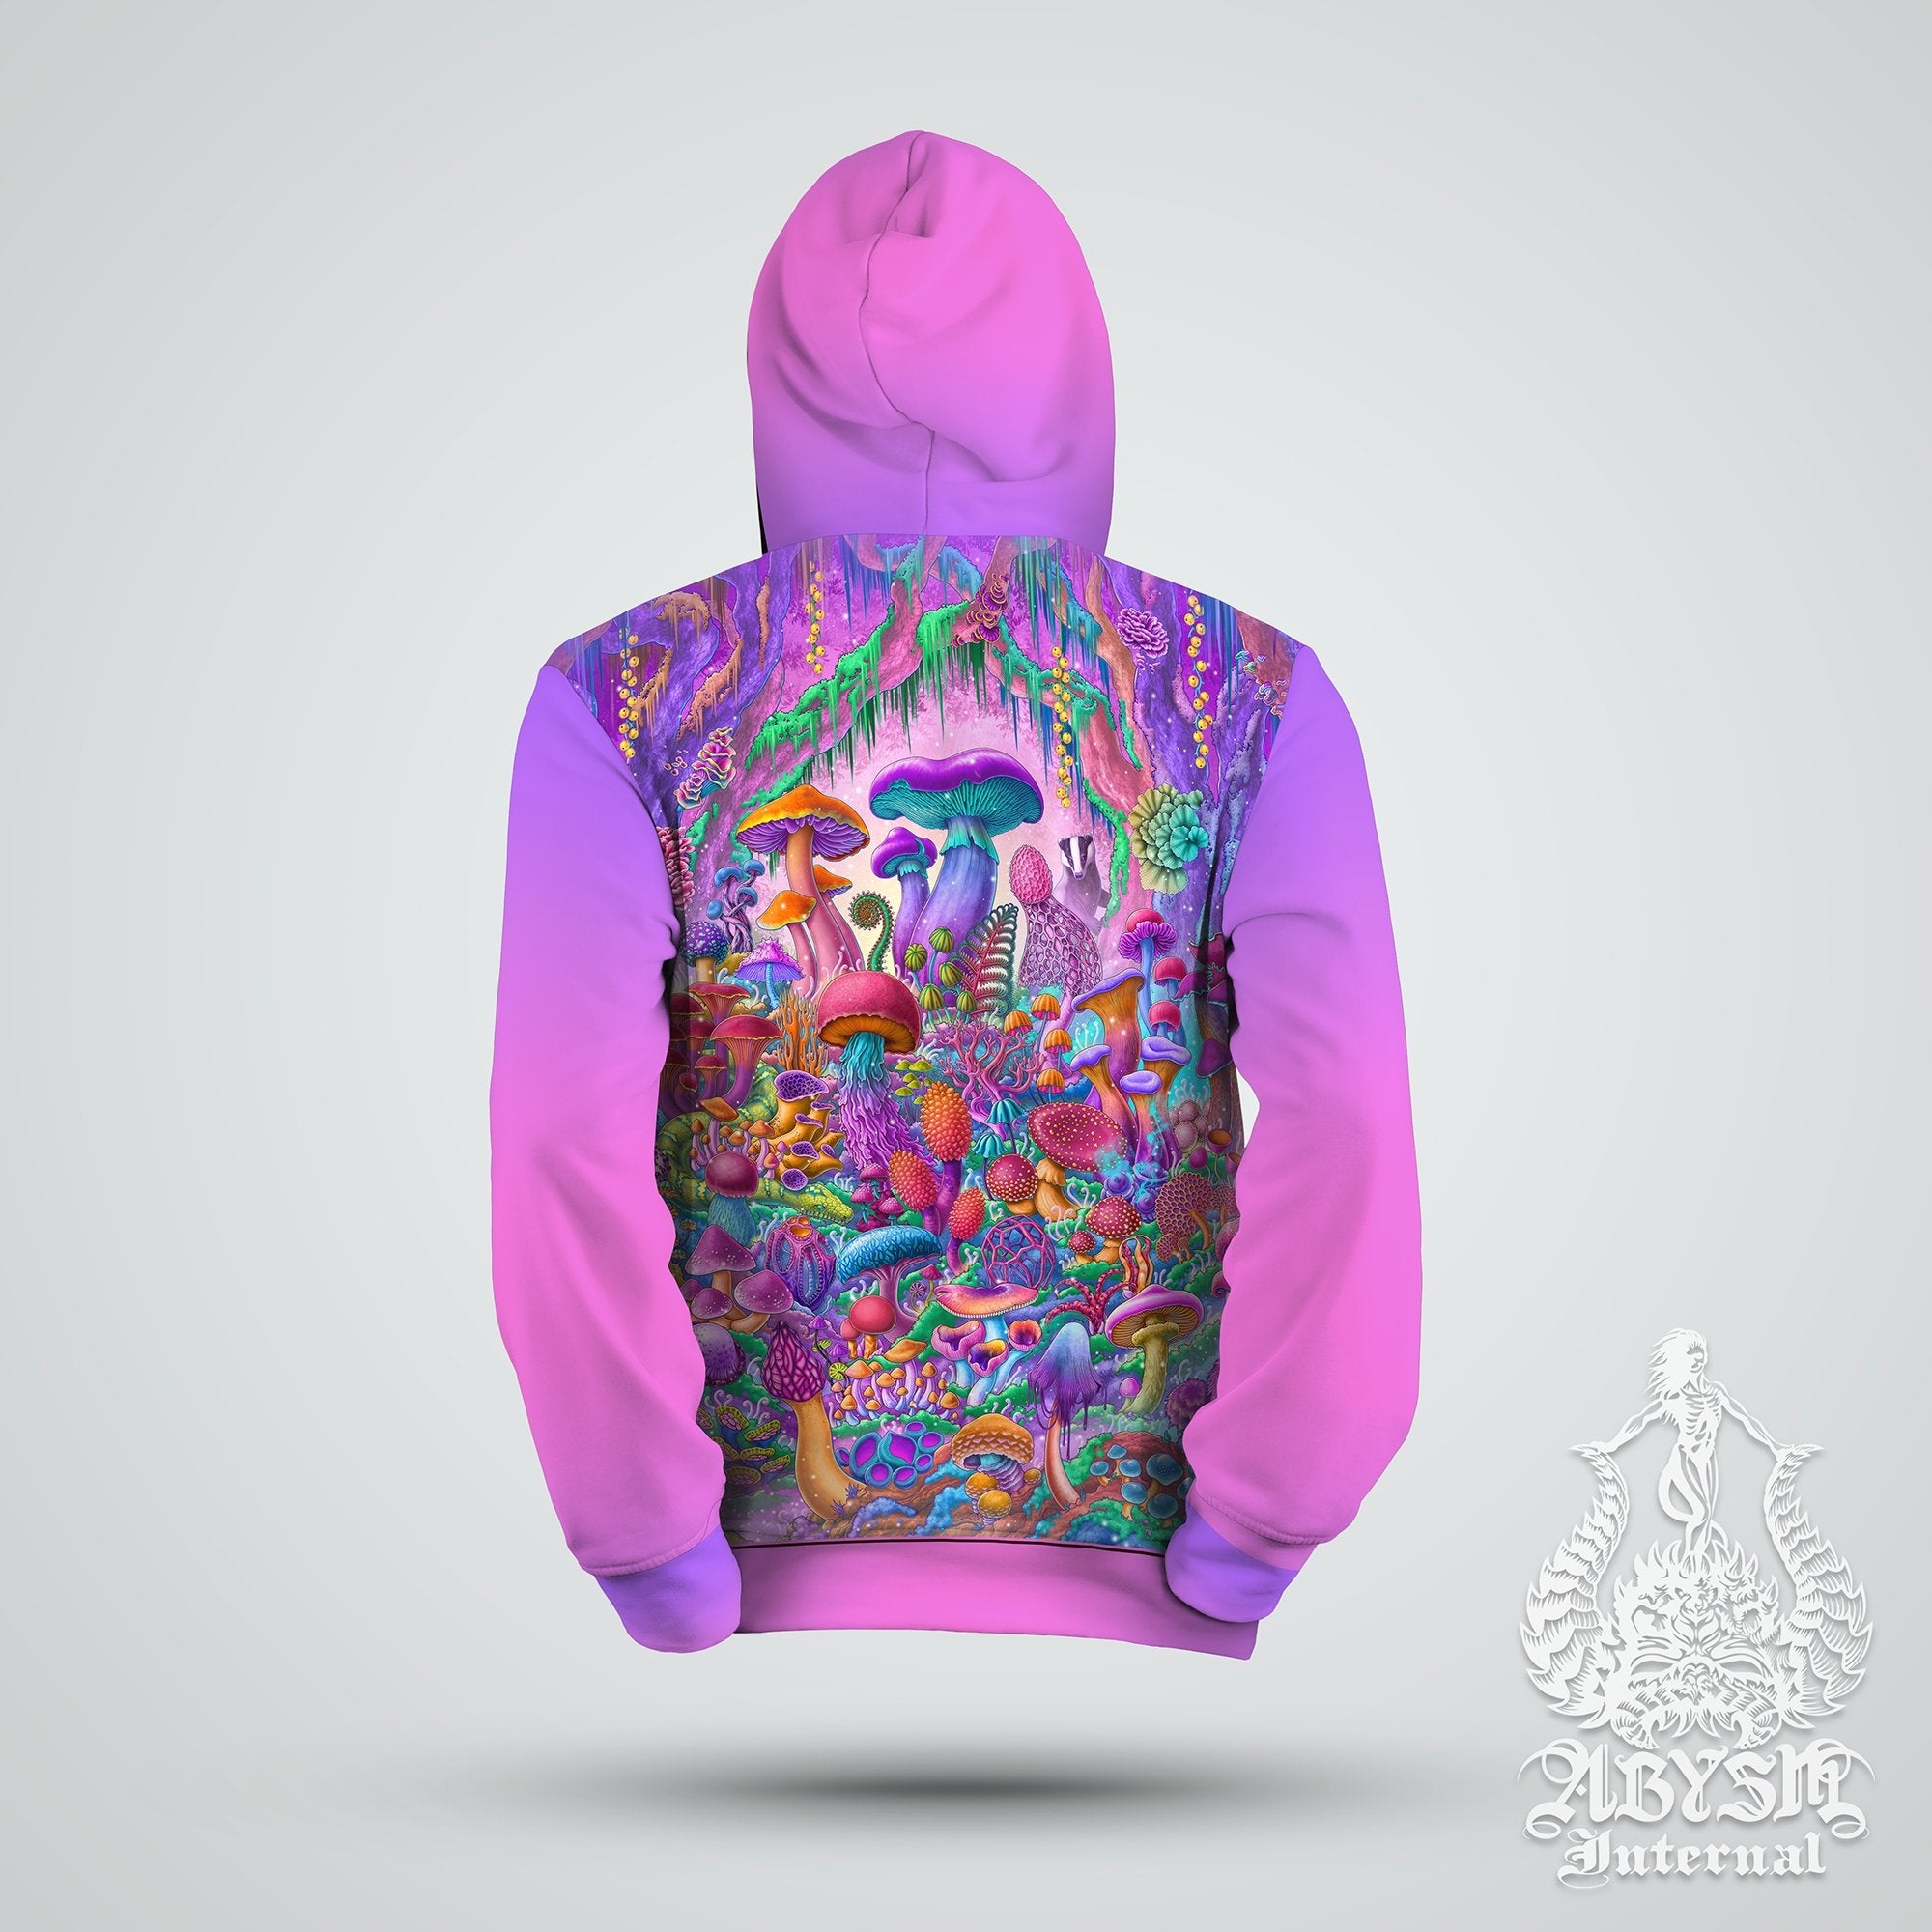 Mushrooms Hoodie, Trippy Aesthetic Pullover, Festival Outfit, Psychedelic Magic Shrooms, Pastel Girl Streetwear, Indie Alternative Clothing, Unisex - Abysm Internal